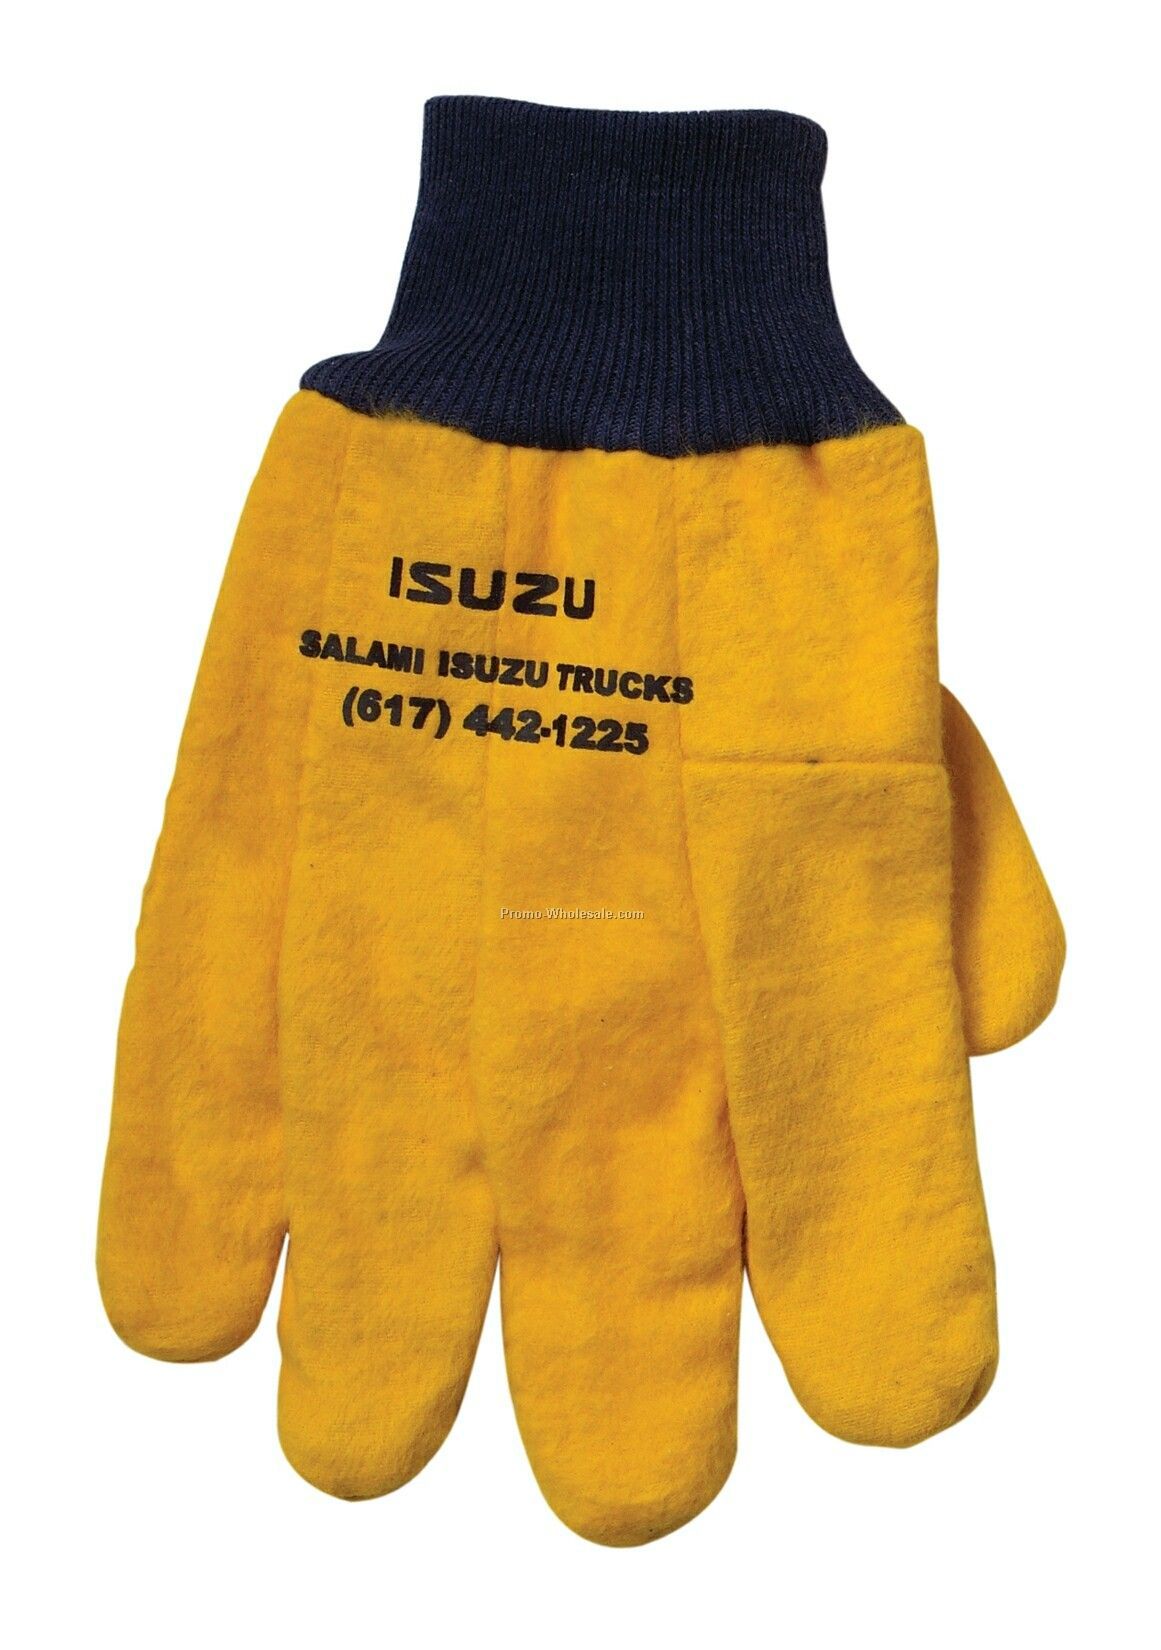 Large Economy Cotton Chore Glove With Red Knit Wrist (One Size)